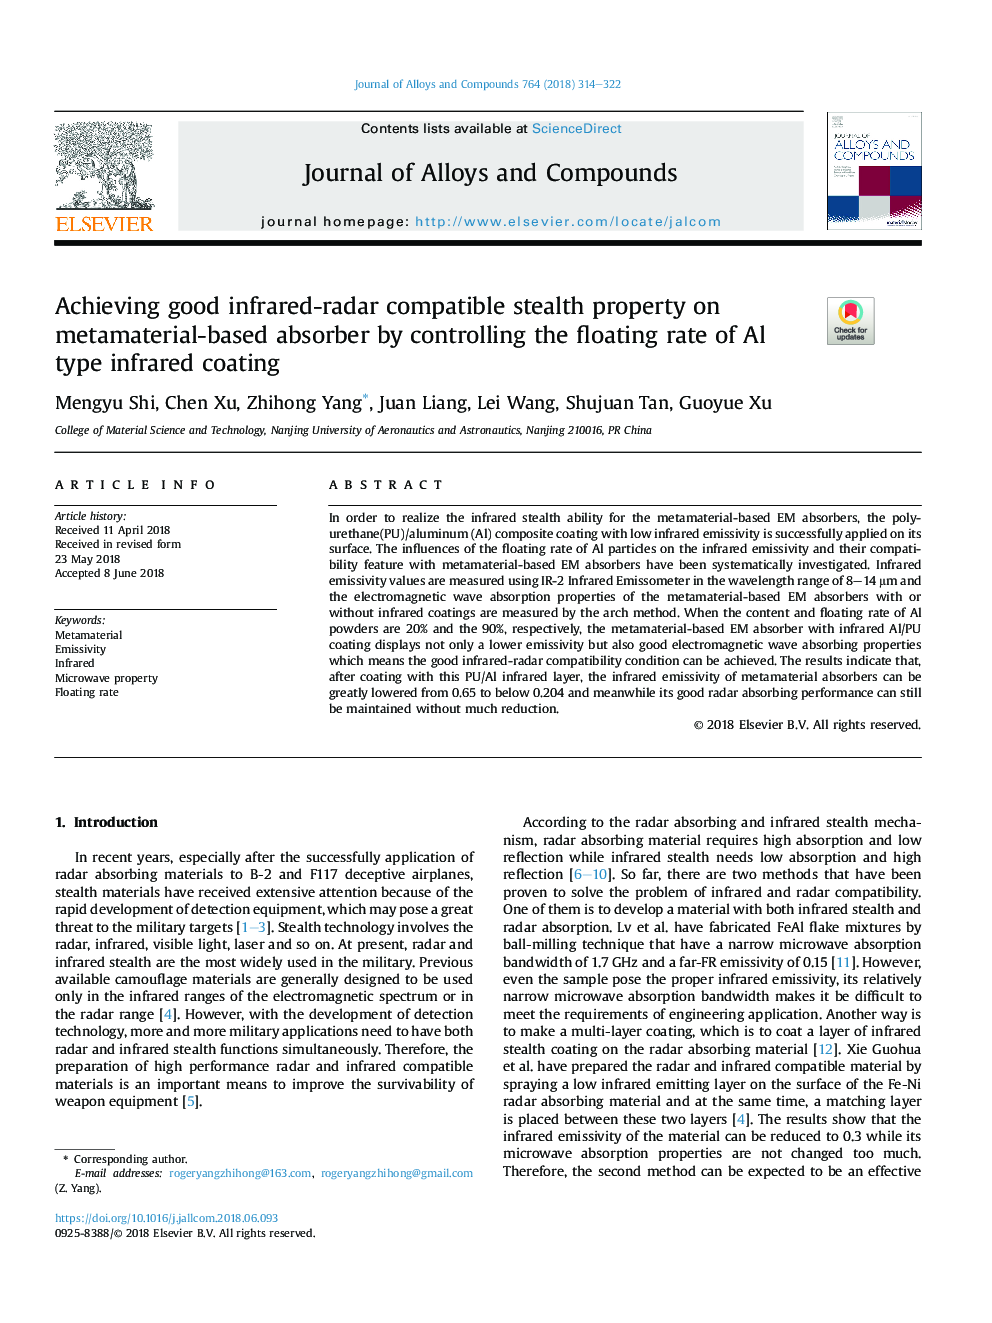 Achieving good infrared-radar compatible stealth property on metamaterial-based absorber by controlling the floating rate of Al type infrared coating